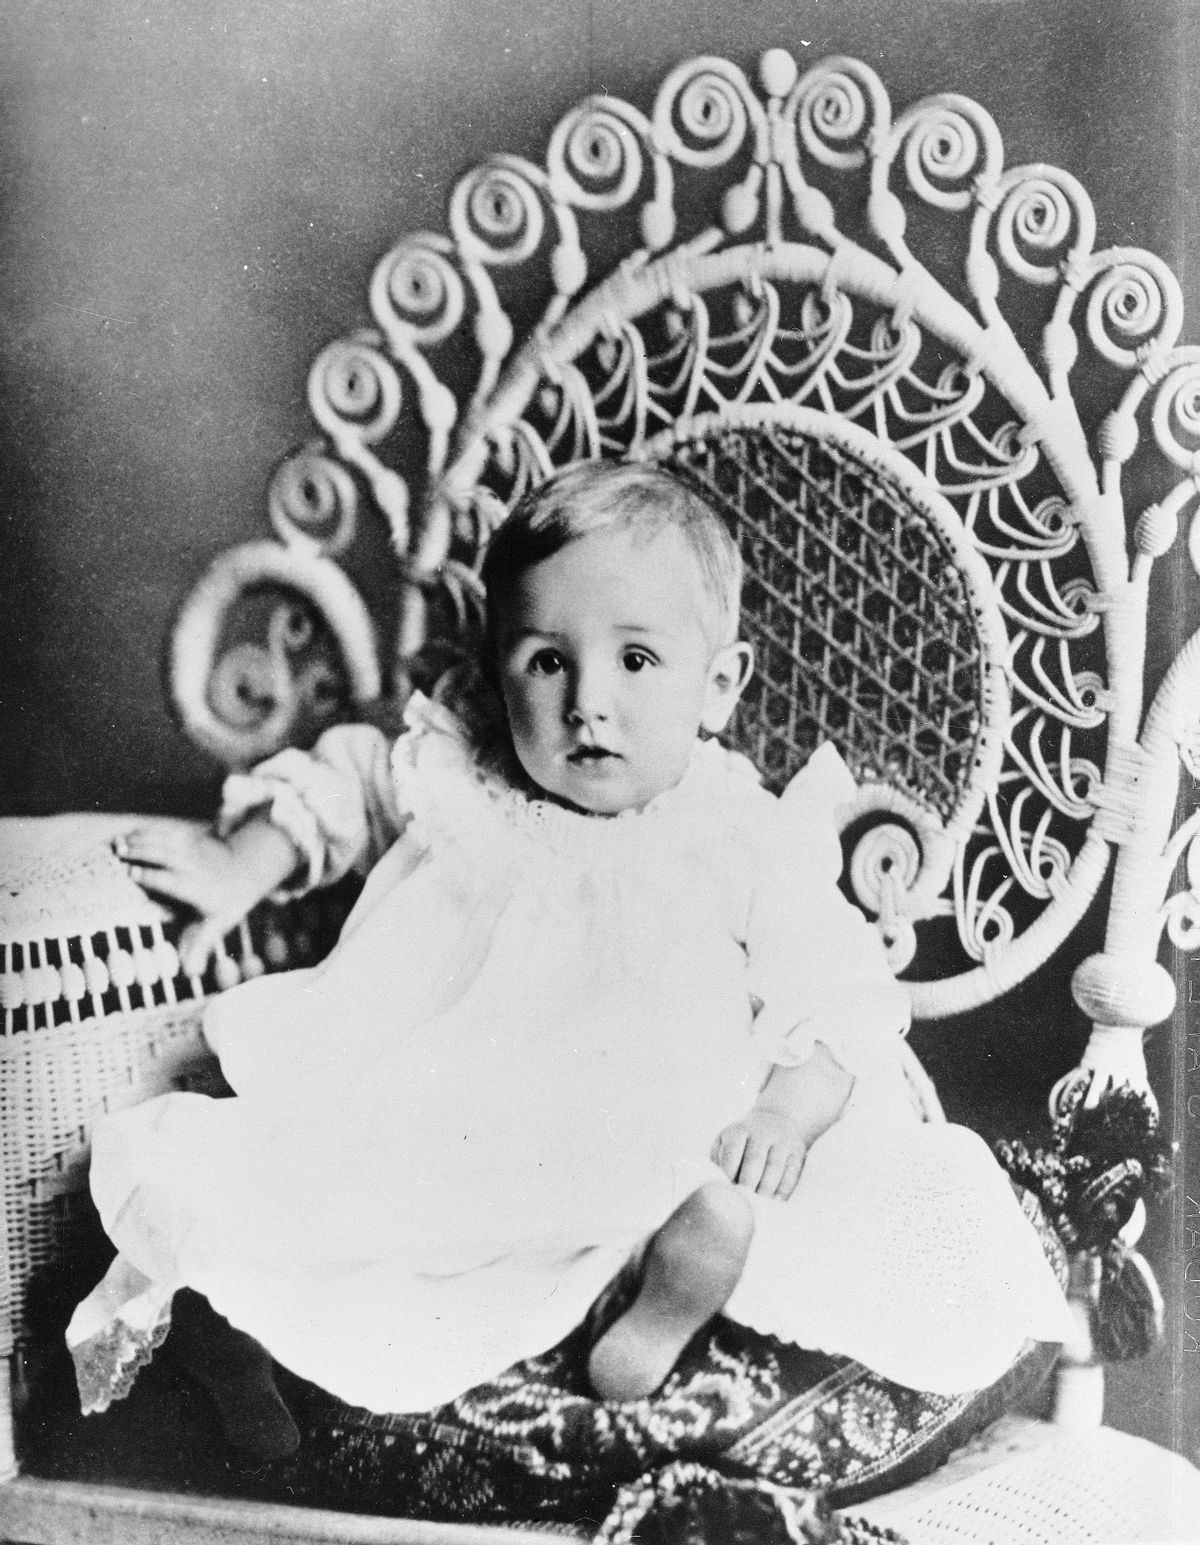 Studio portrait of future American film studio head Walt Disney (1901 - 1966) as an infant, seated on an ornate chair, circa 1902. (Photo by Hulton Archive/Getty Images) (Hulton Archive/Getty Images)